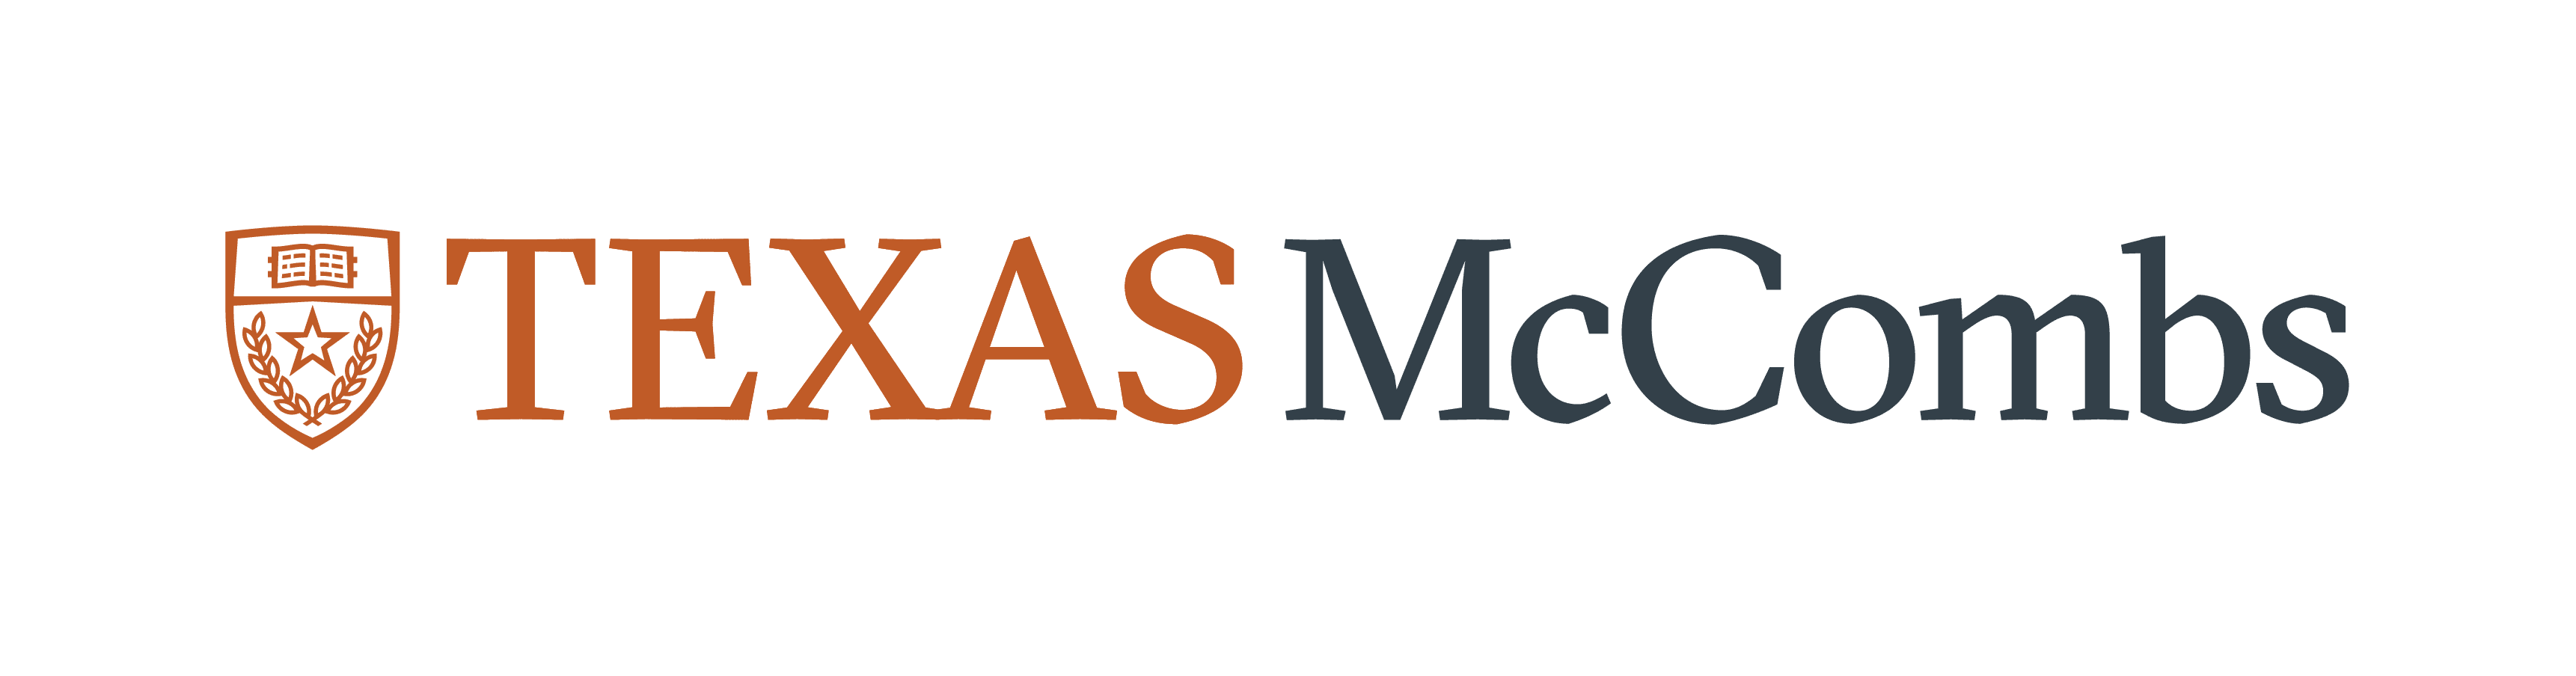 RGB McCombs School Informal yes with shield